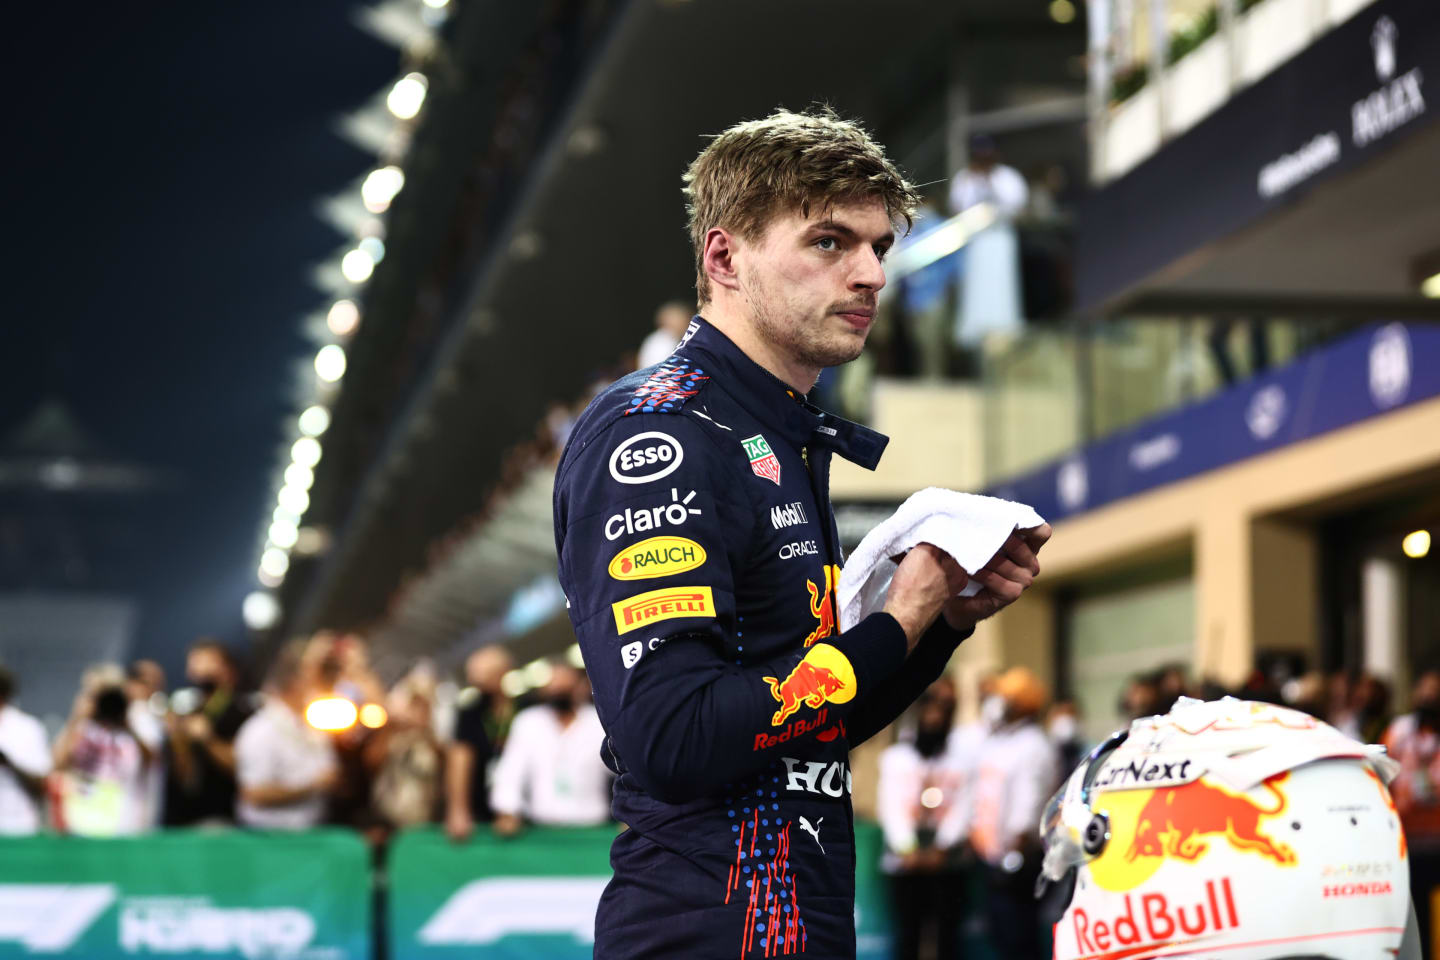 ABU DHABI, UNITED ARAB EMIRATES - DECEMBER 11: Pole position qualifier Max Verstappen of Netherlands and Red Bull Racing looks on in parc ferme  during qualifying ahead of the F1 Grand Prix of Abu Dhabi at Yas Marina Circuit on December 11, 2021 in Abu Dhabi, United Arab Emirates. (Photo by Mark Thompson/Getty Images)